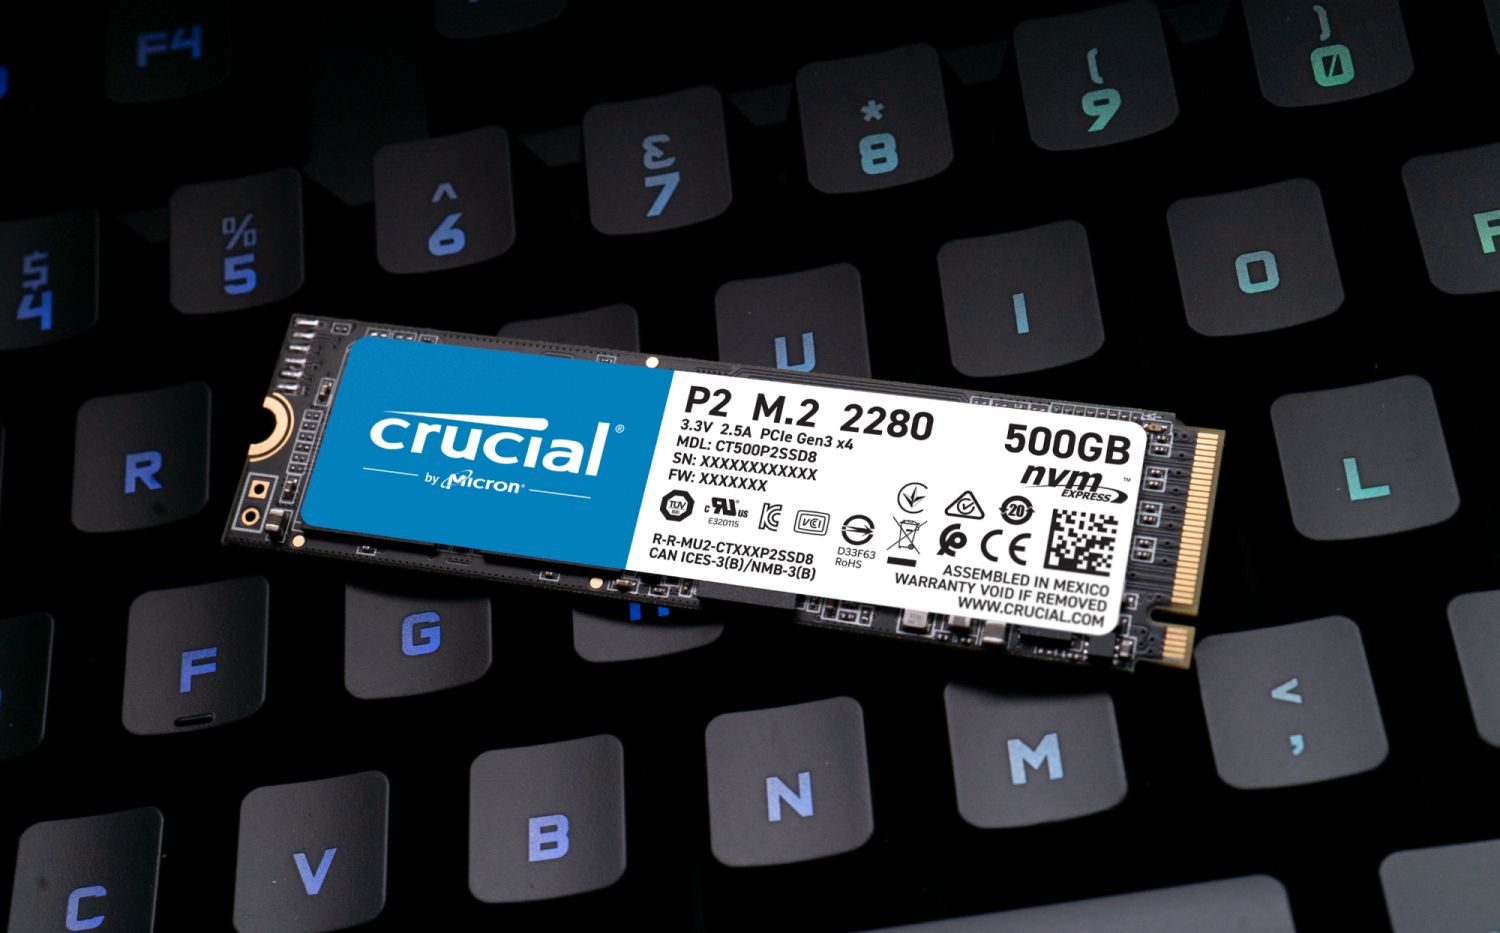 Crucial® P2 SSD